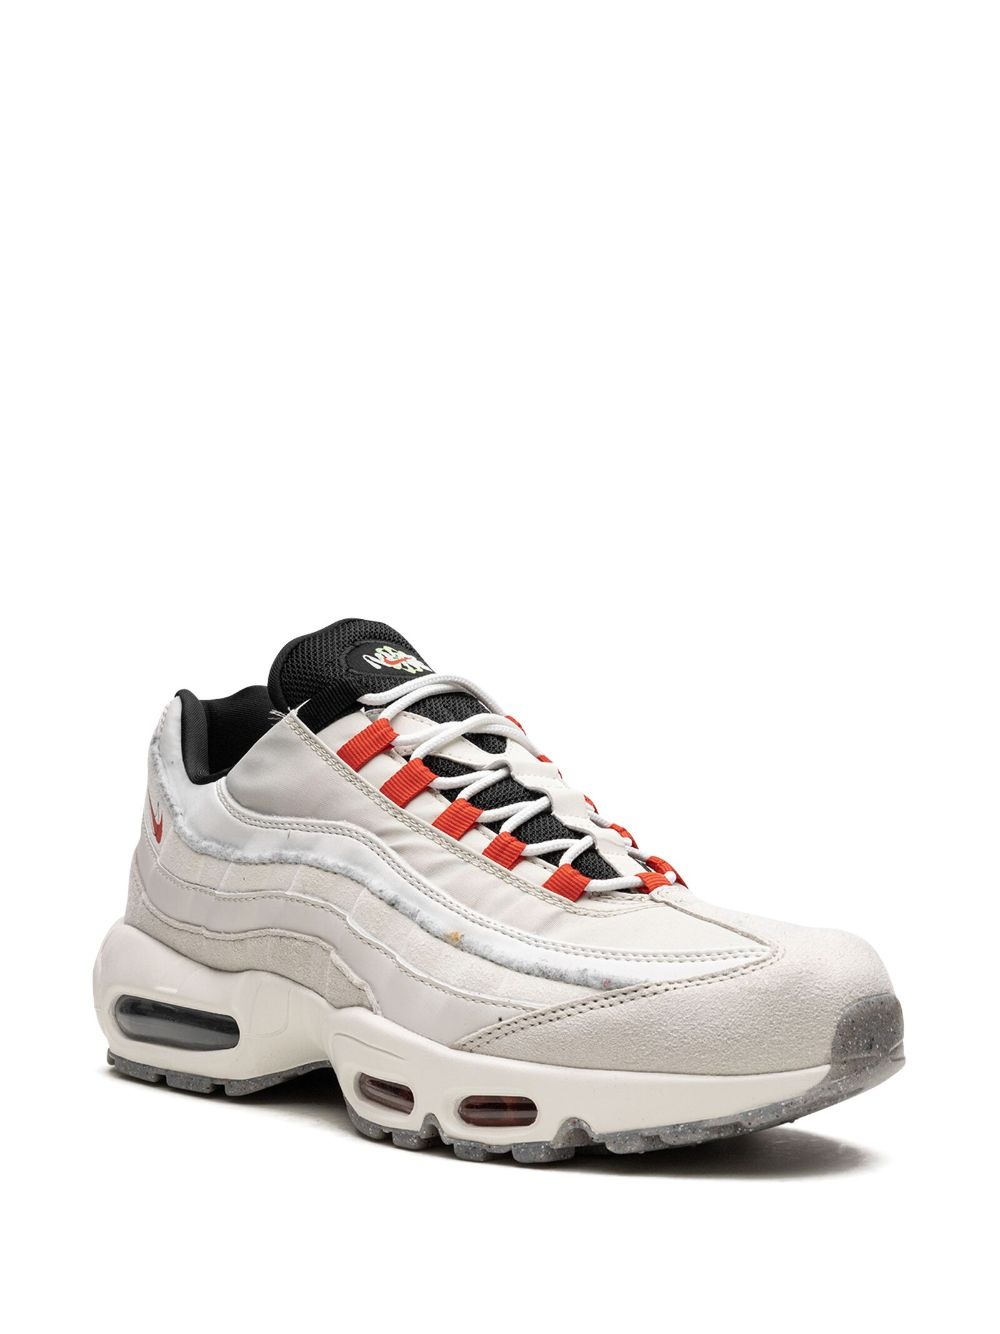 Air Max 95 SE "Double Swoosh" sneakers - 2